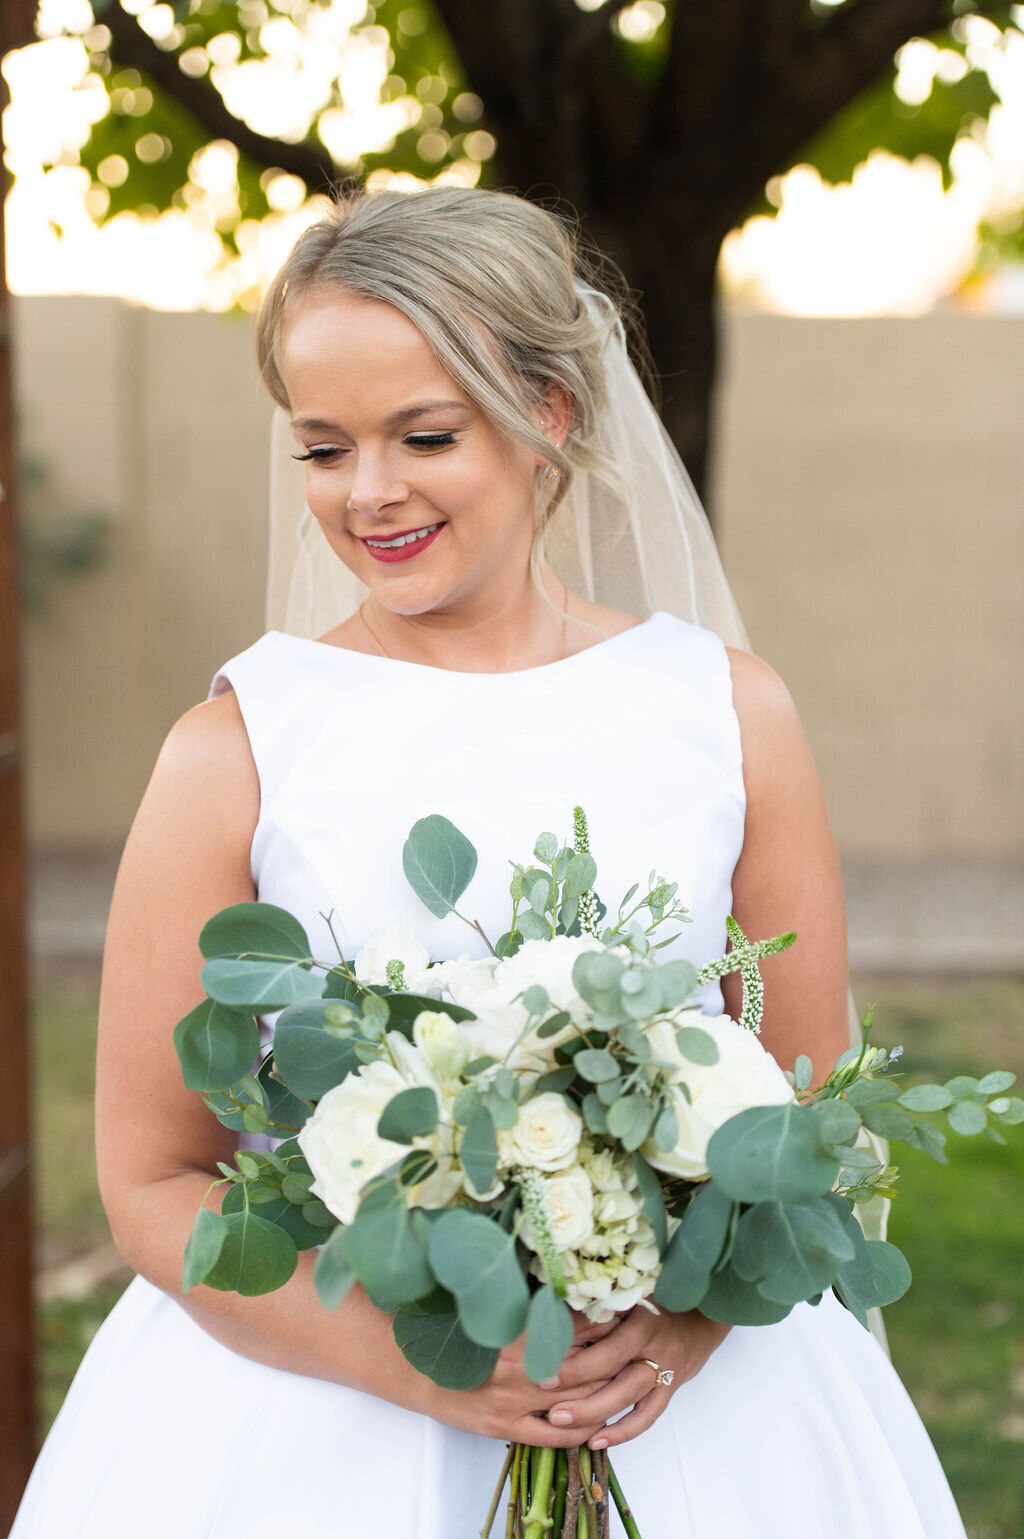 A bride holding a green and white wedding bouquet.